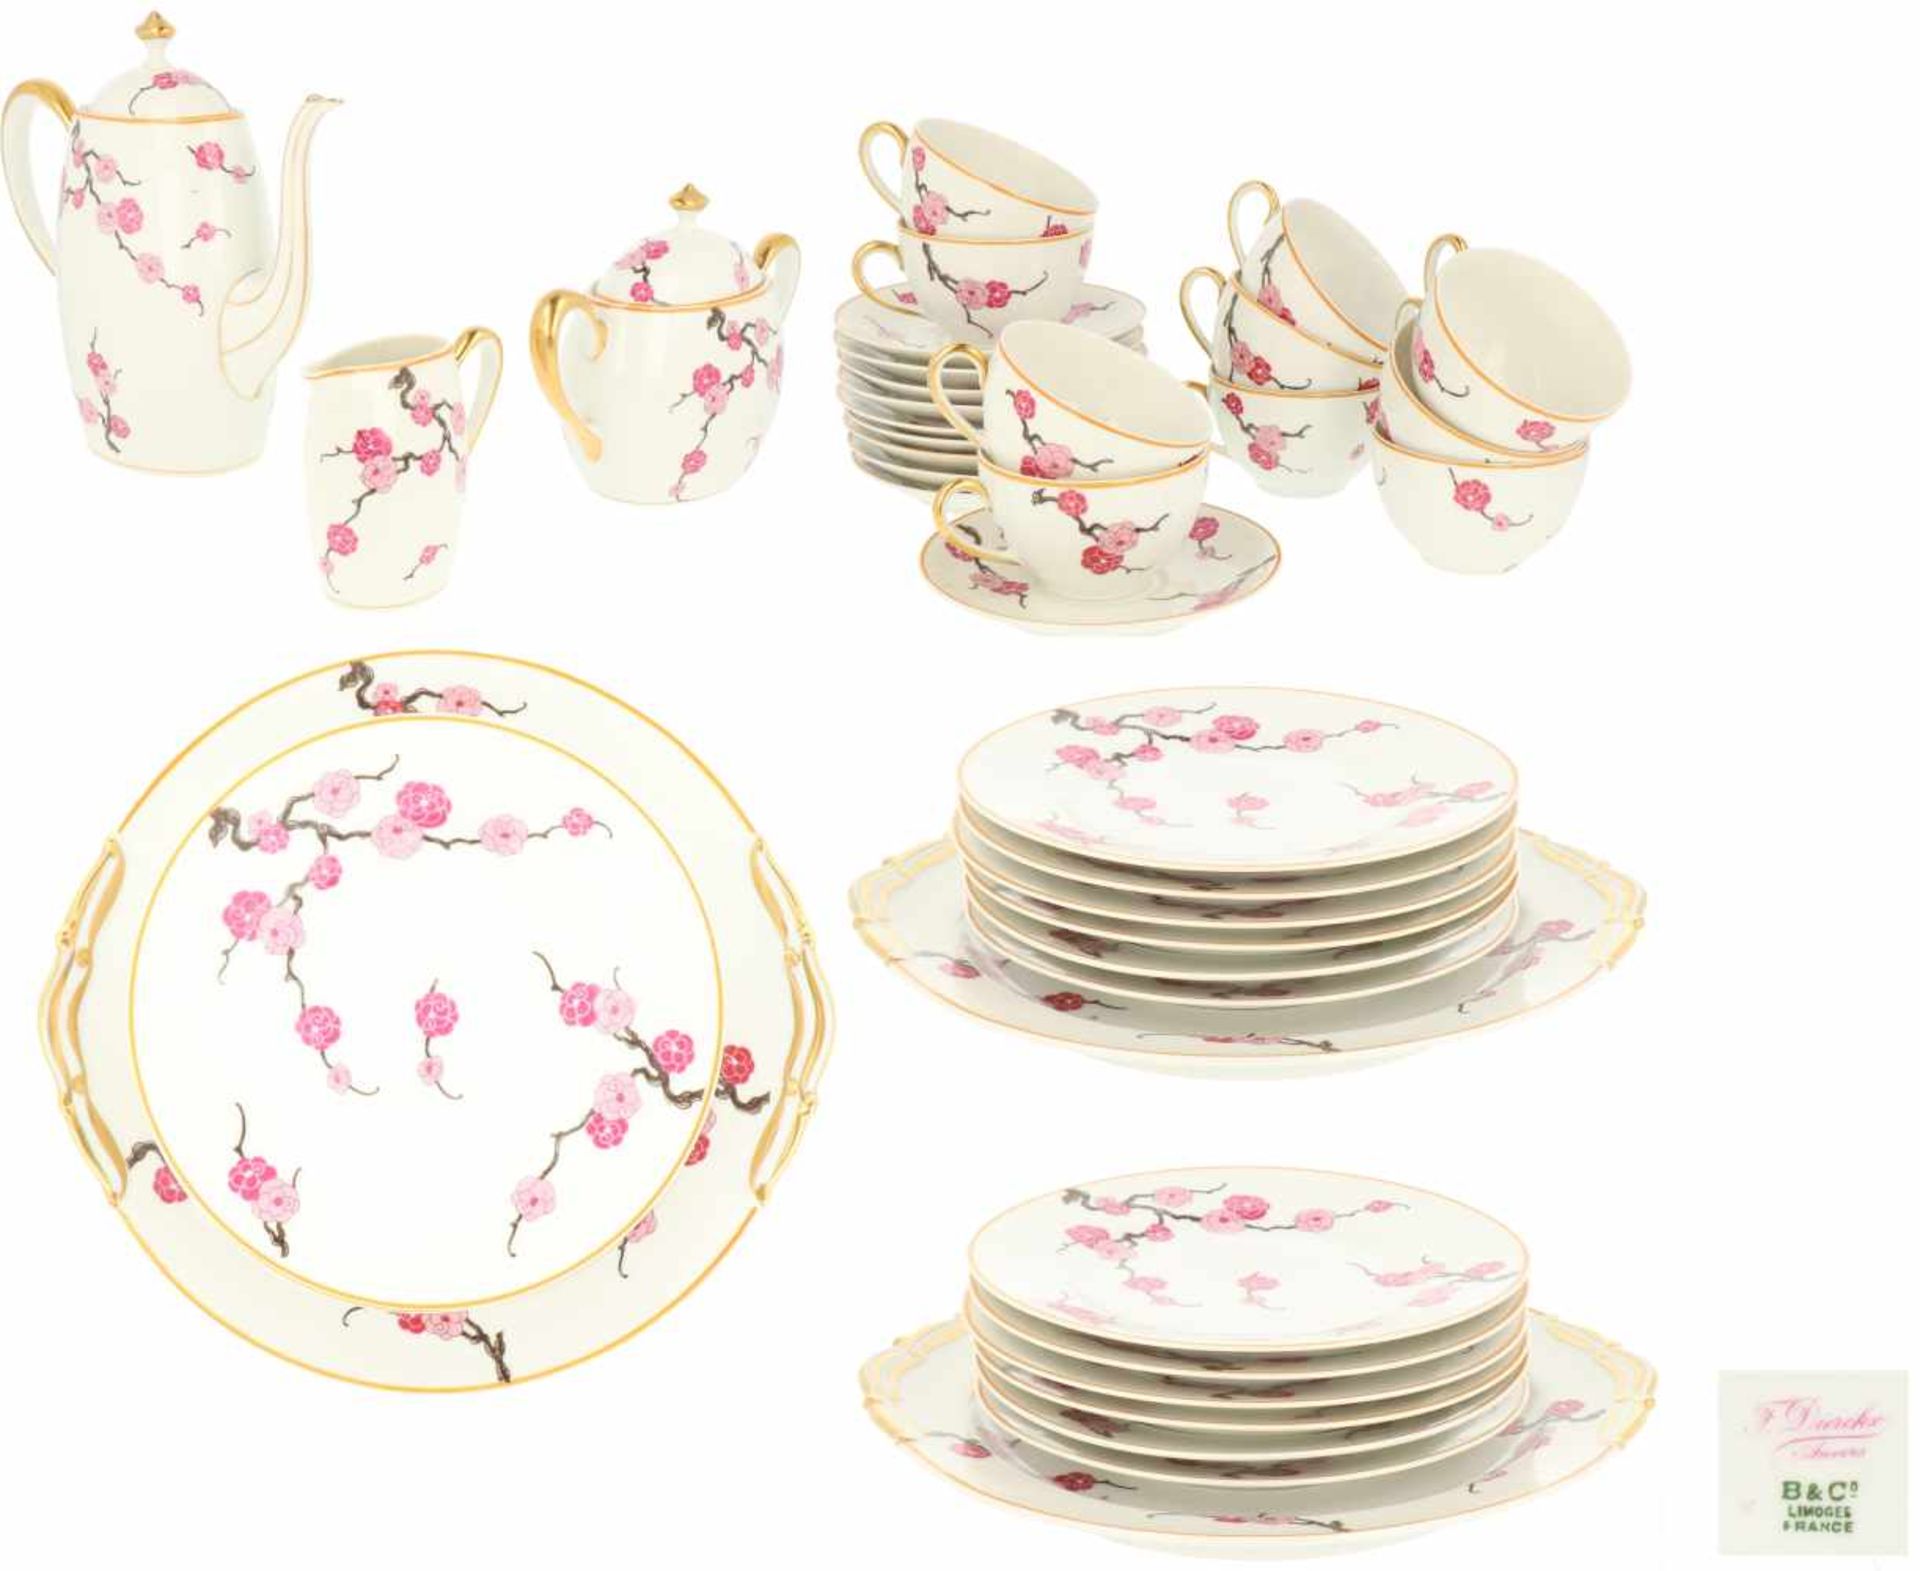 A 26-piece part porcelain dinner service decorated with flowers, marked Limoges. France, 20th